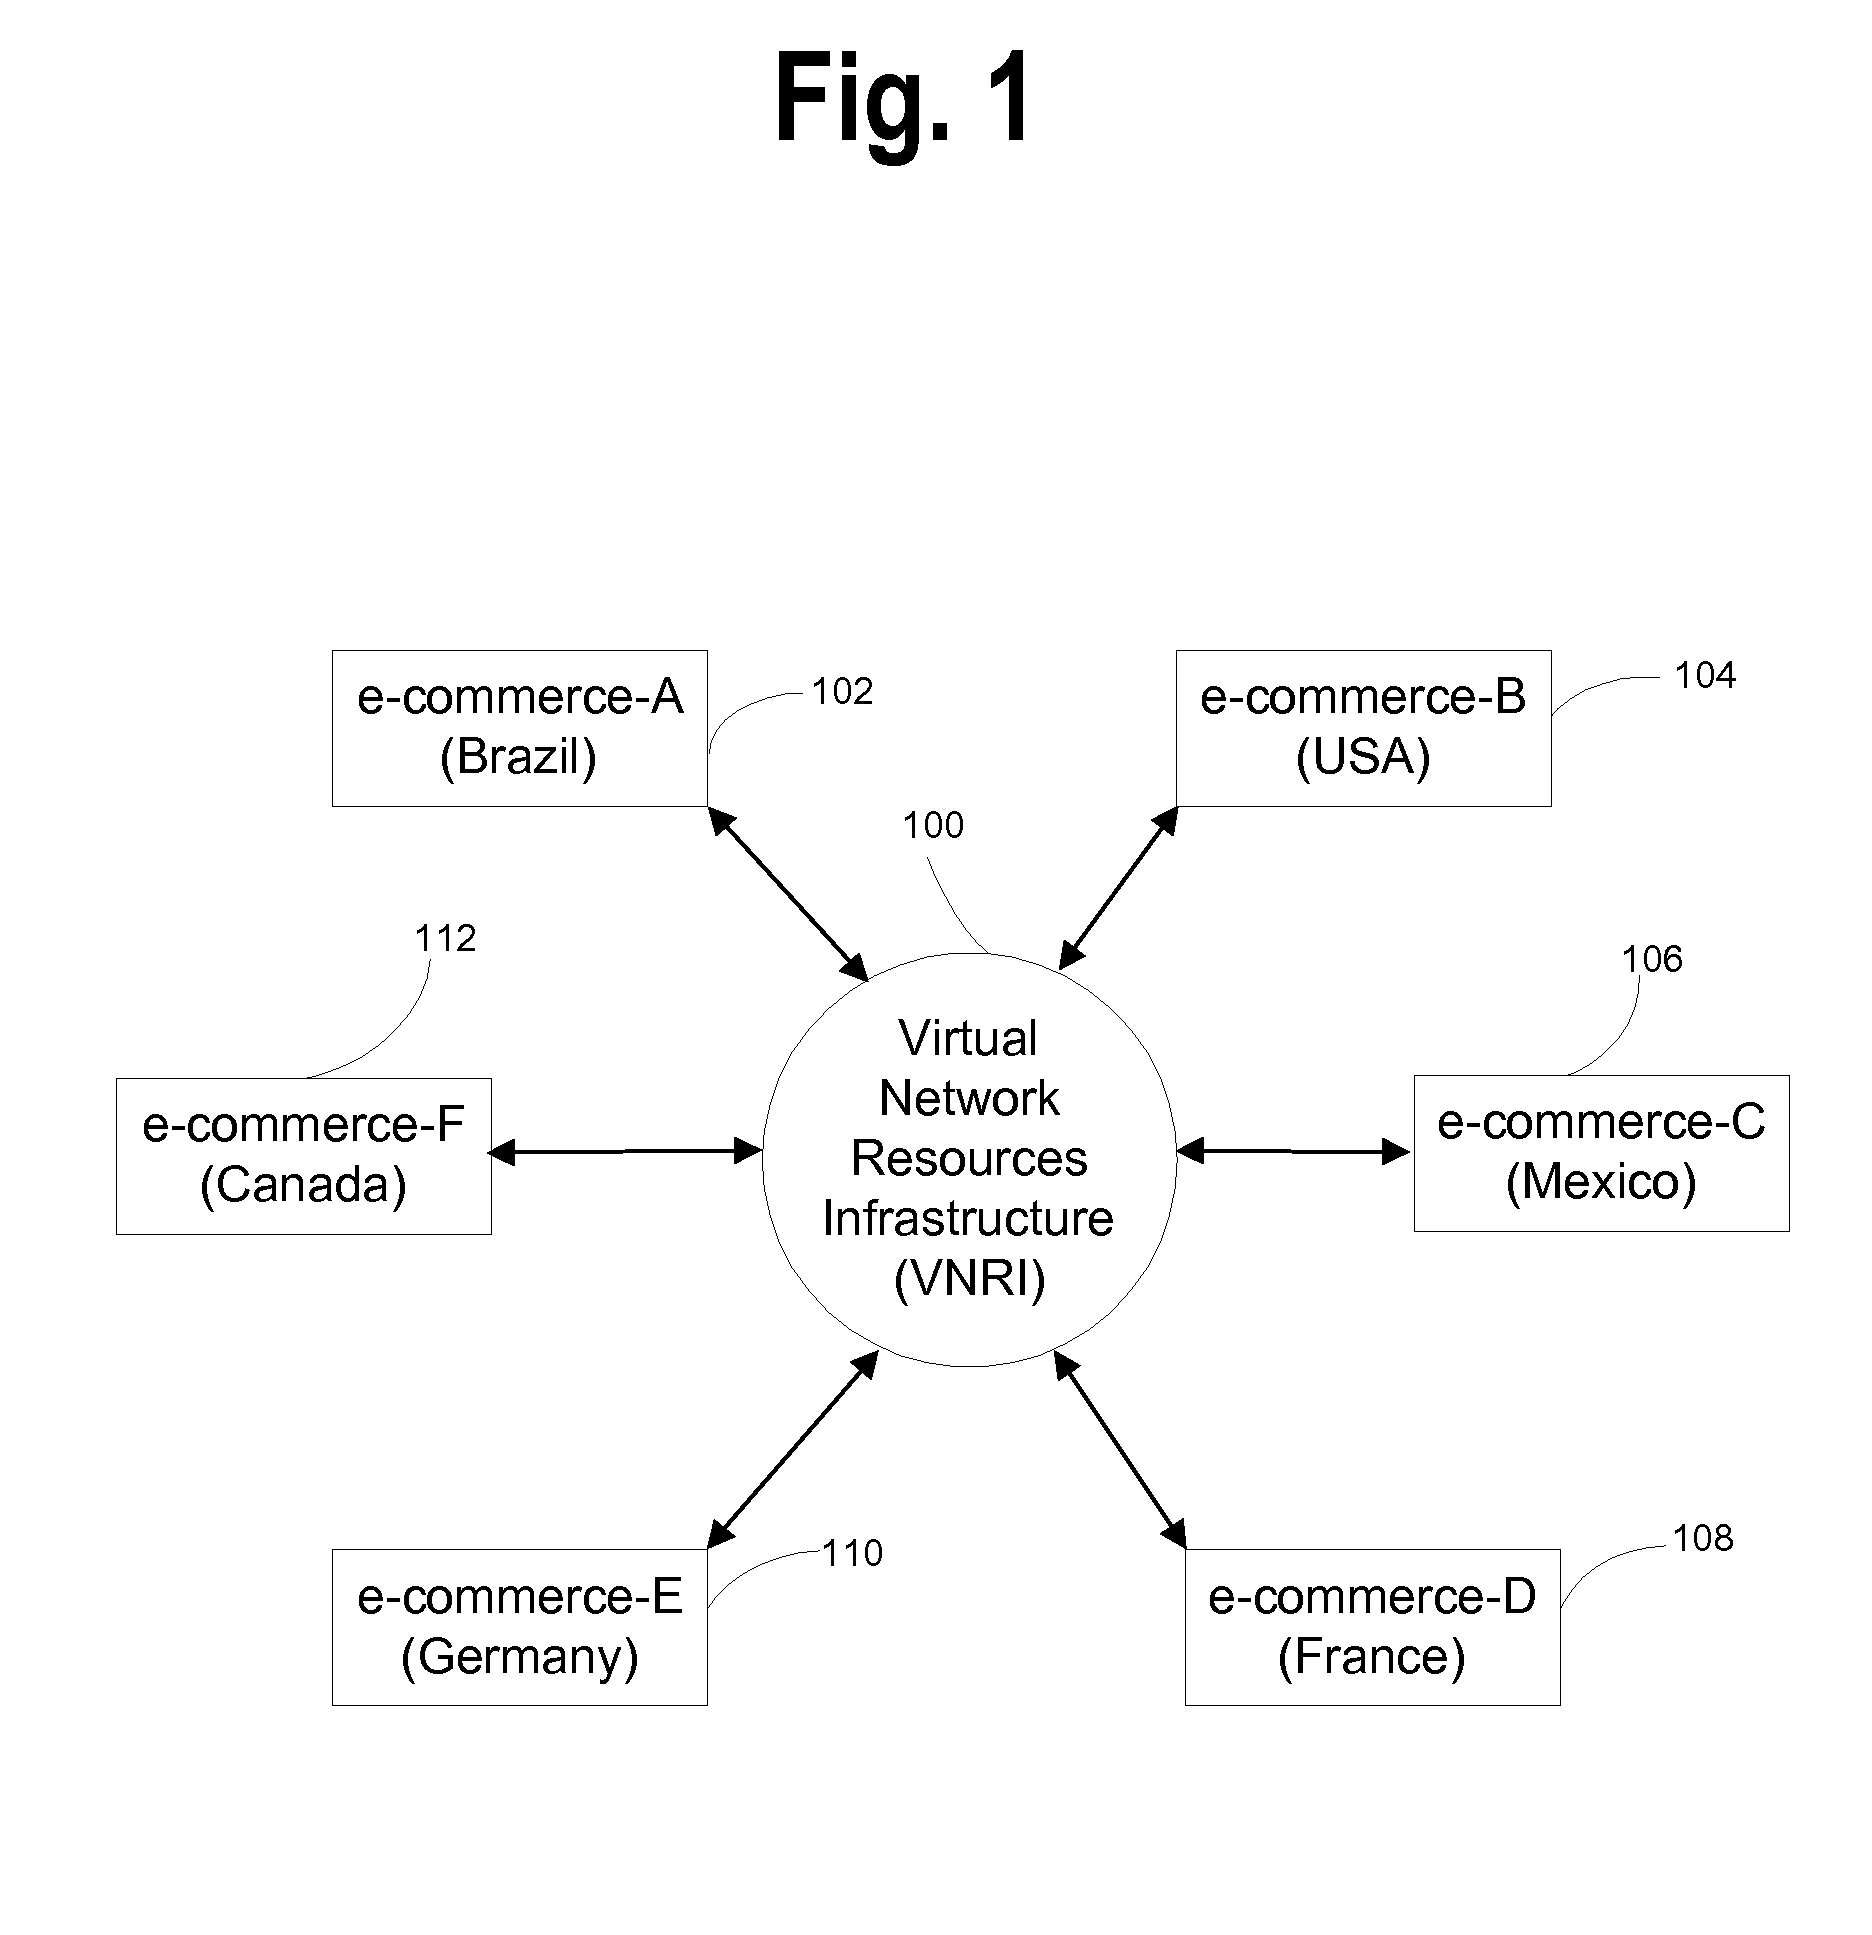 Method of using a code to track user access to content